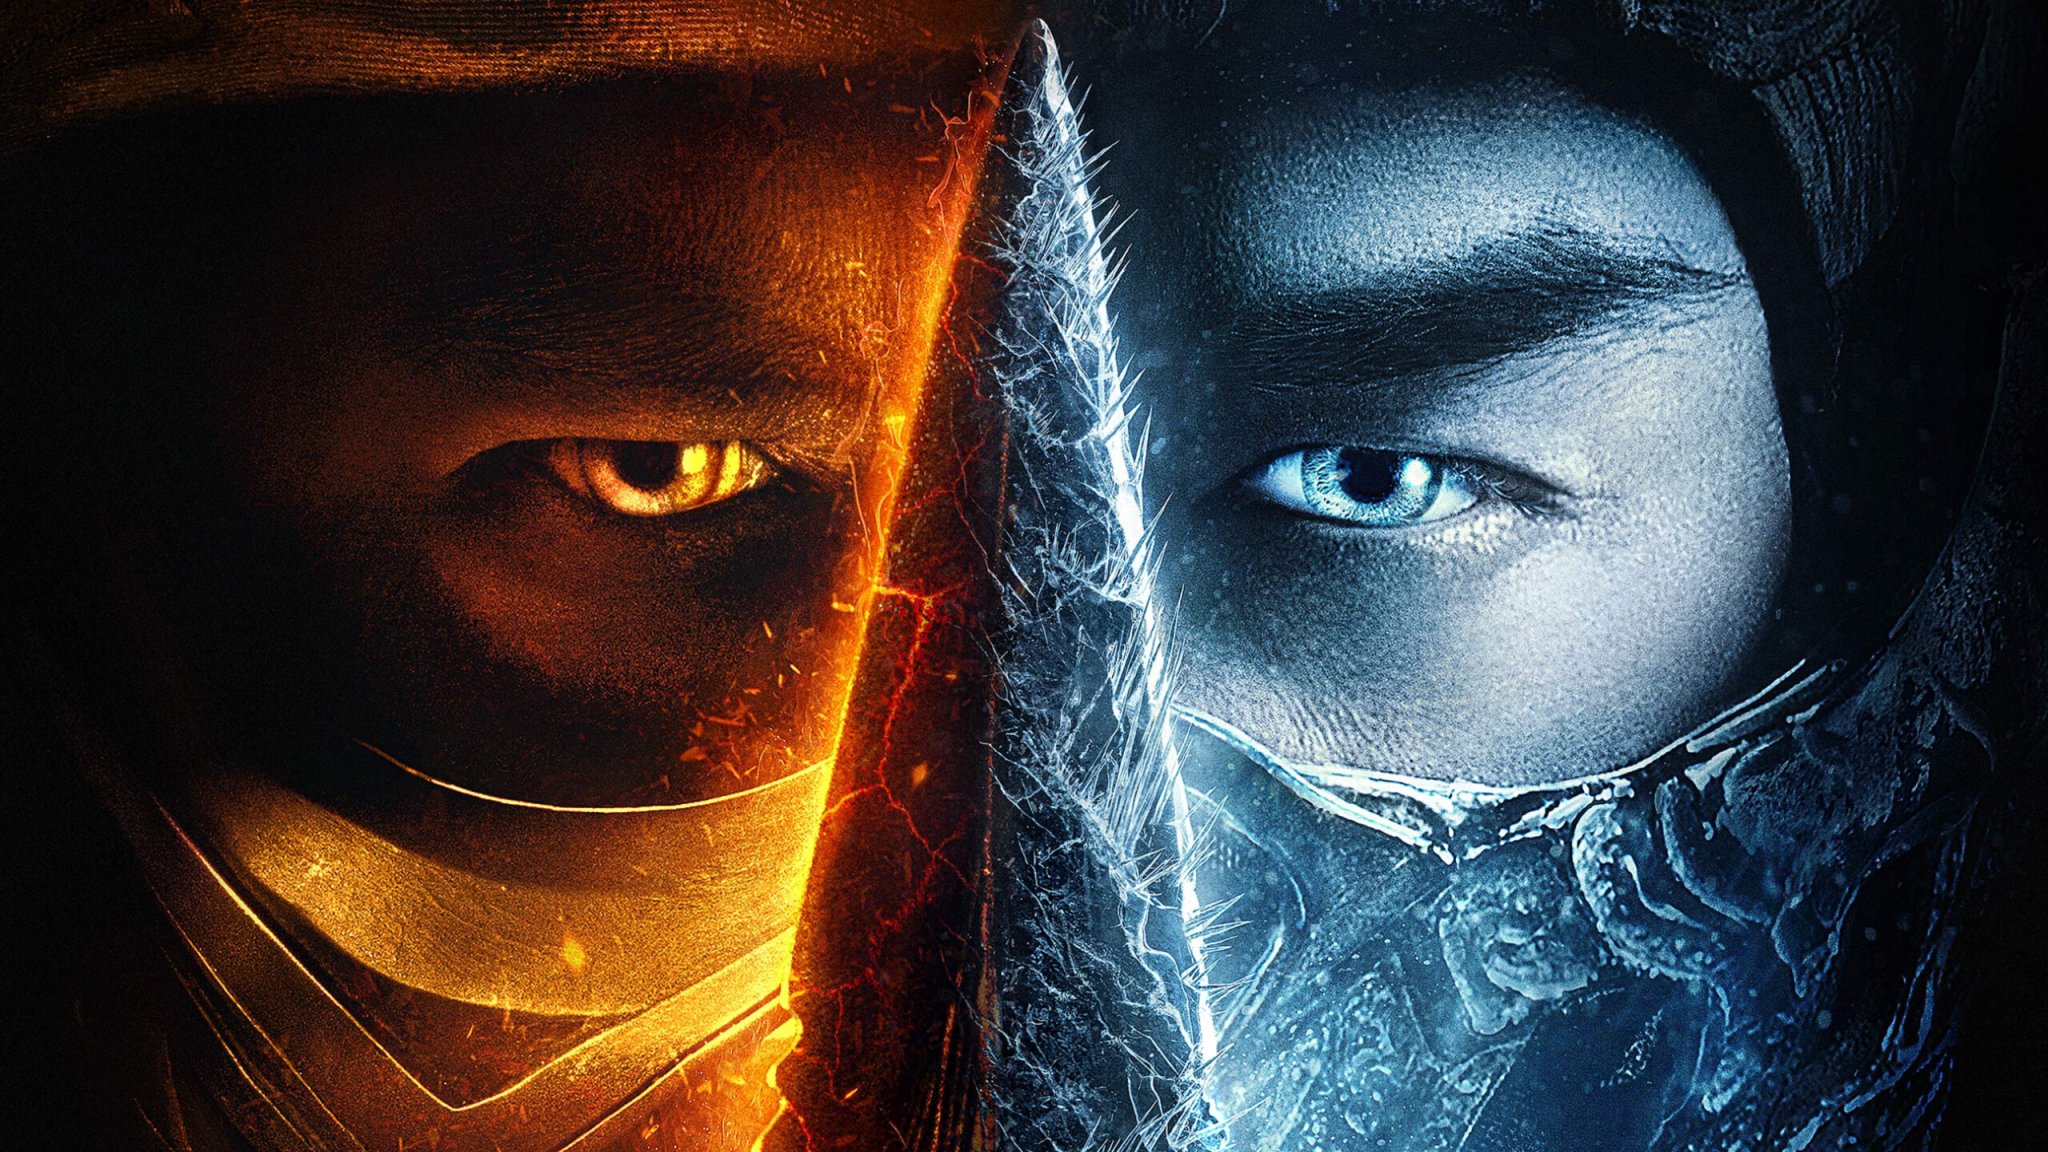 Mortal Kombat Is A Top Performer For HBO Max, Sequels And Series On The Way?